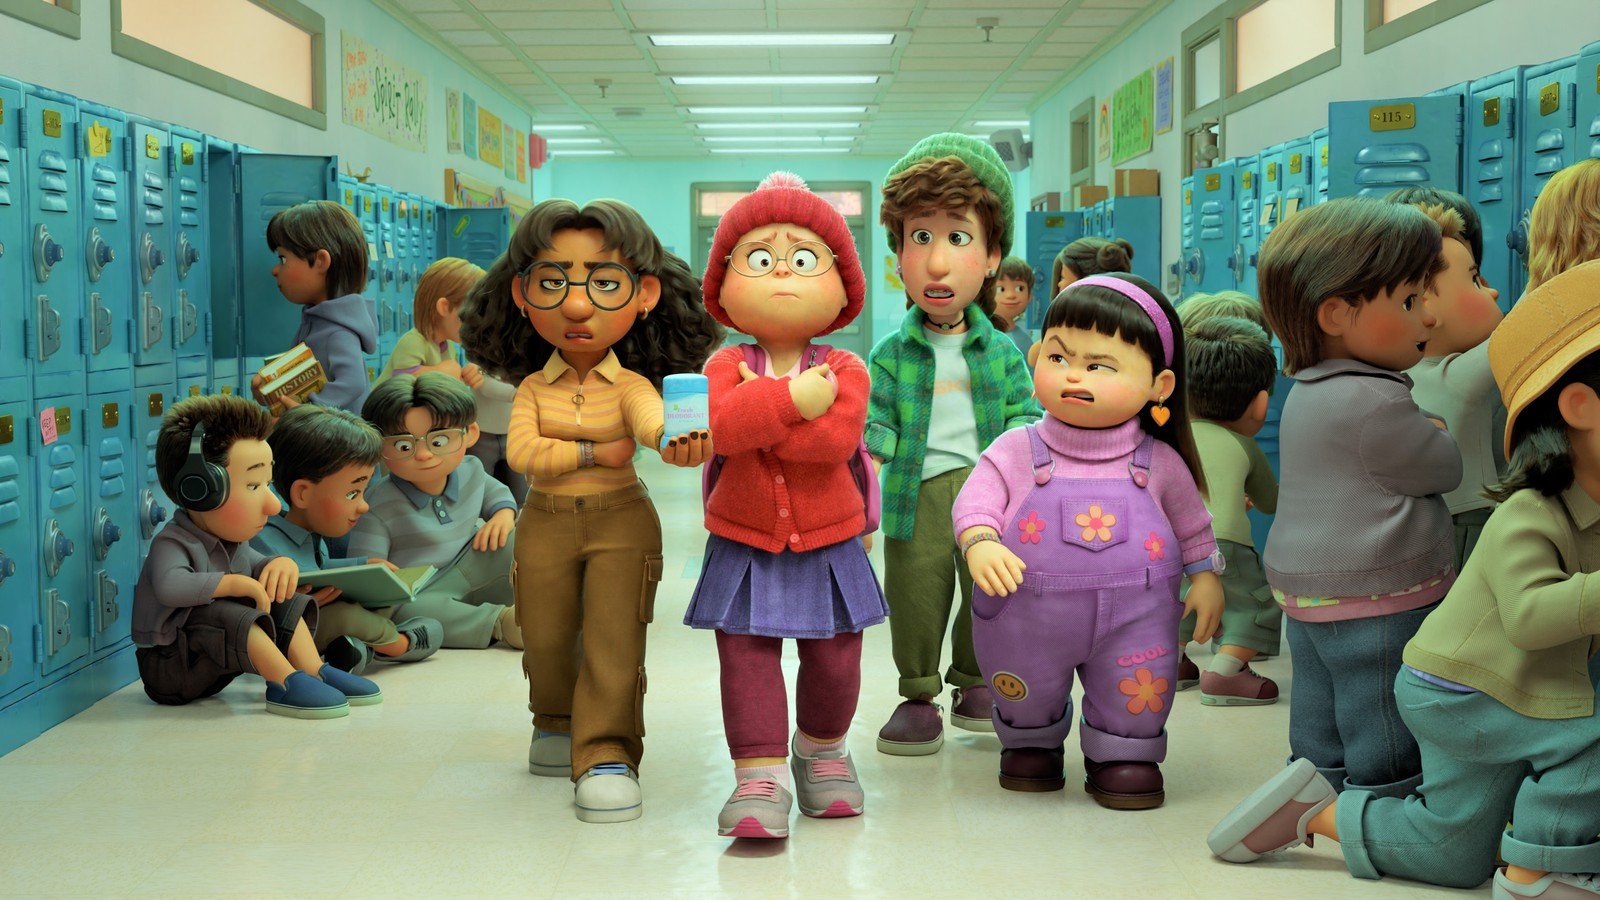 Pixar's 'Turning Red' Has the Cleverest Take on Puberty